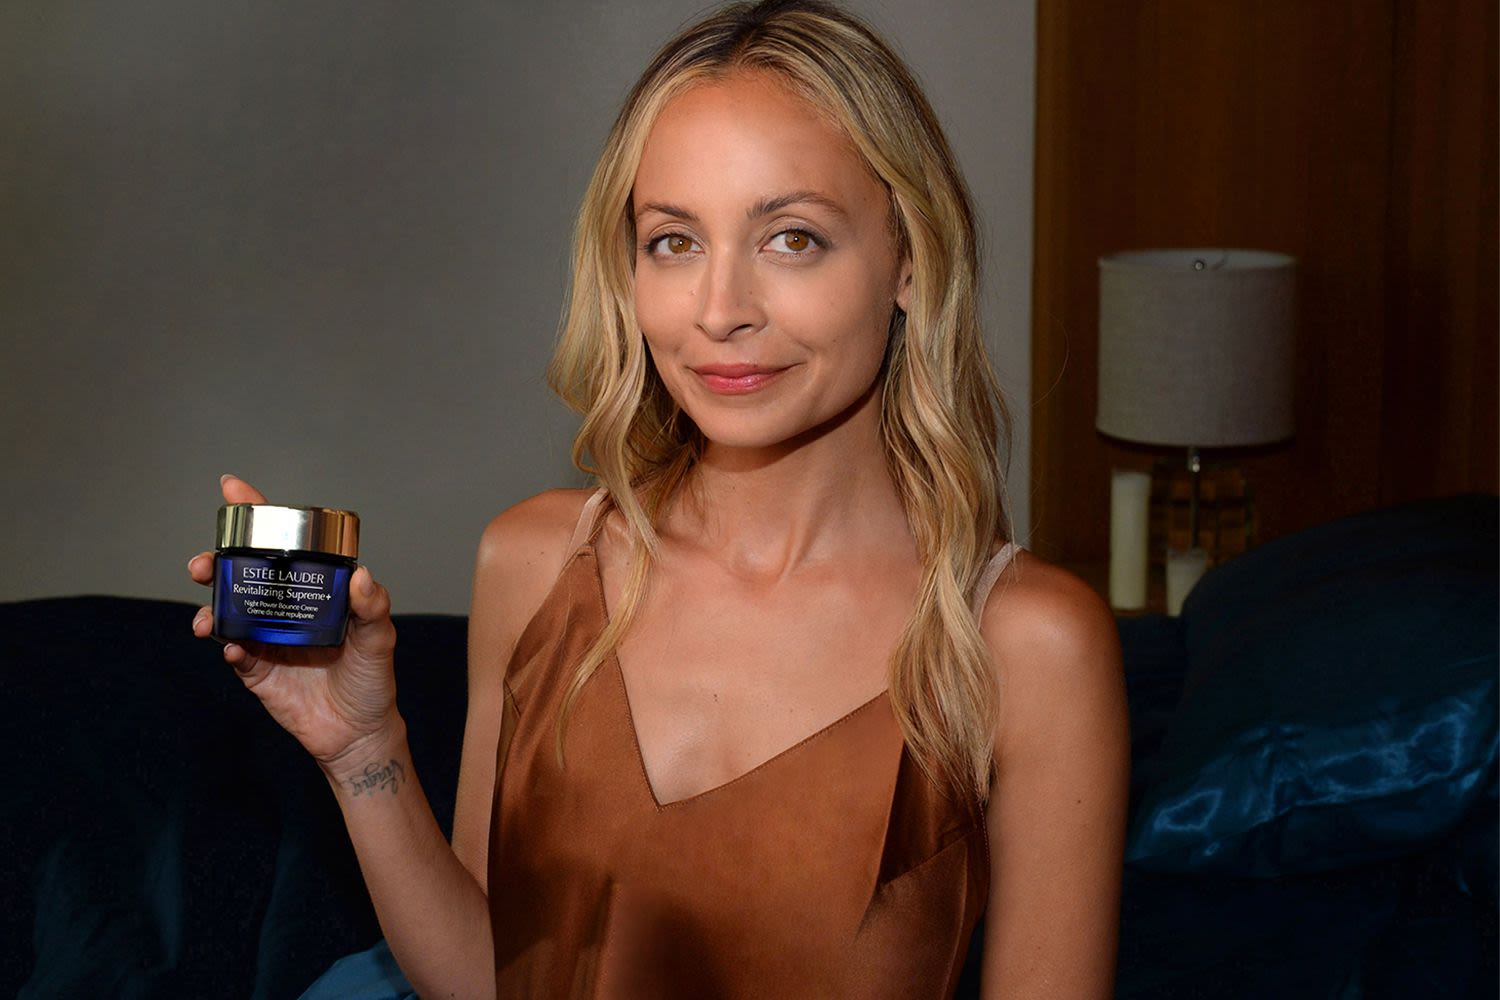 Nicole Richie Trades Nightclubs for Night Serum as the Face of Estée Lauder's New Campaign: 'Authentic to Me' (Exclusive)